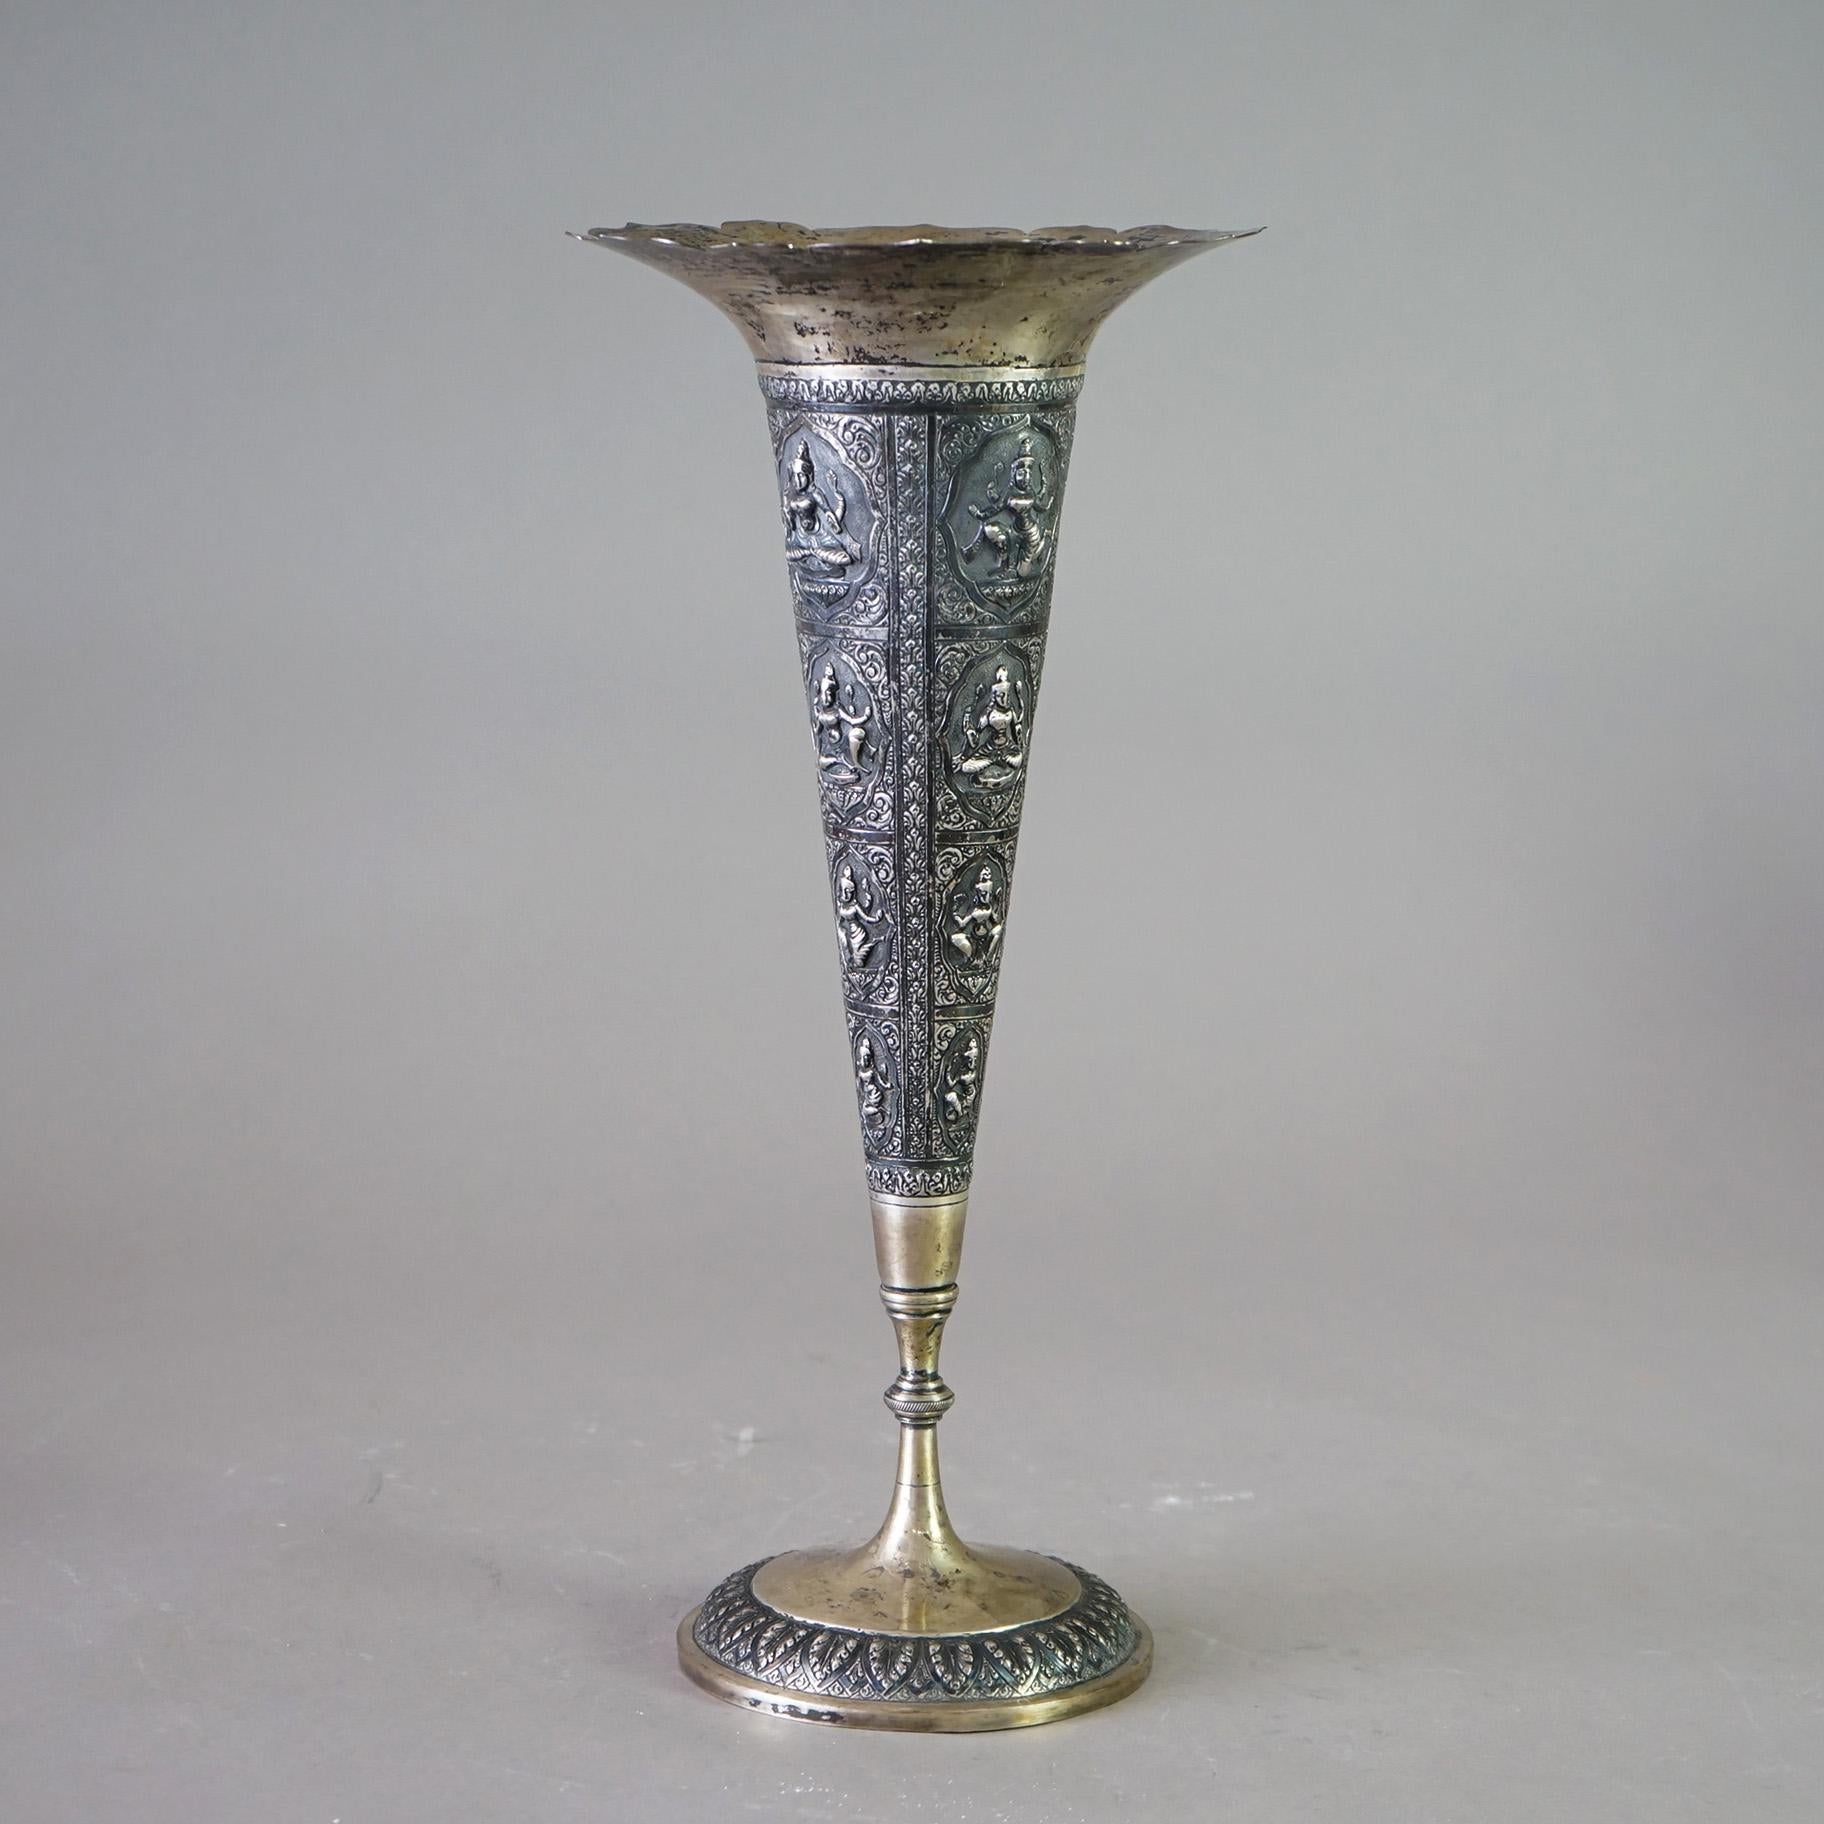 An antique Tibetan vase offers 800 silver construction in flared form, with fluted rim and having embossed reserves with Shivas, 19th century
Figural Embossed Shiva Tall Vase with Fluted Rim 

Measures - 16.5